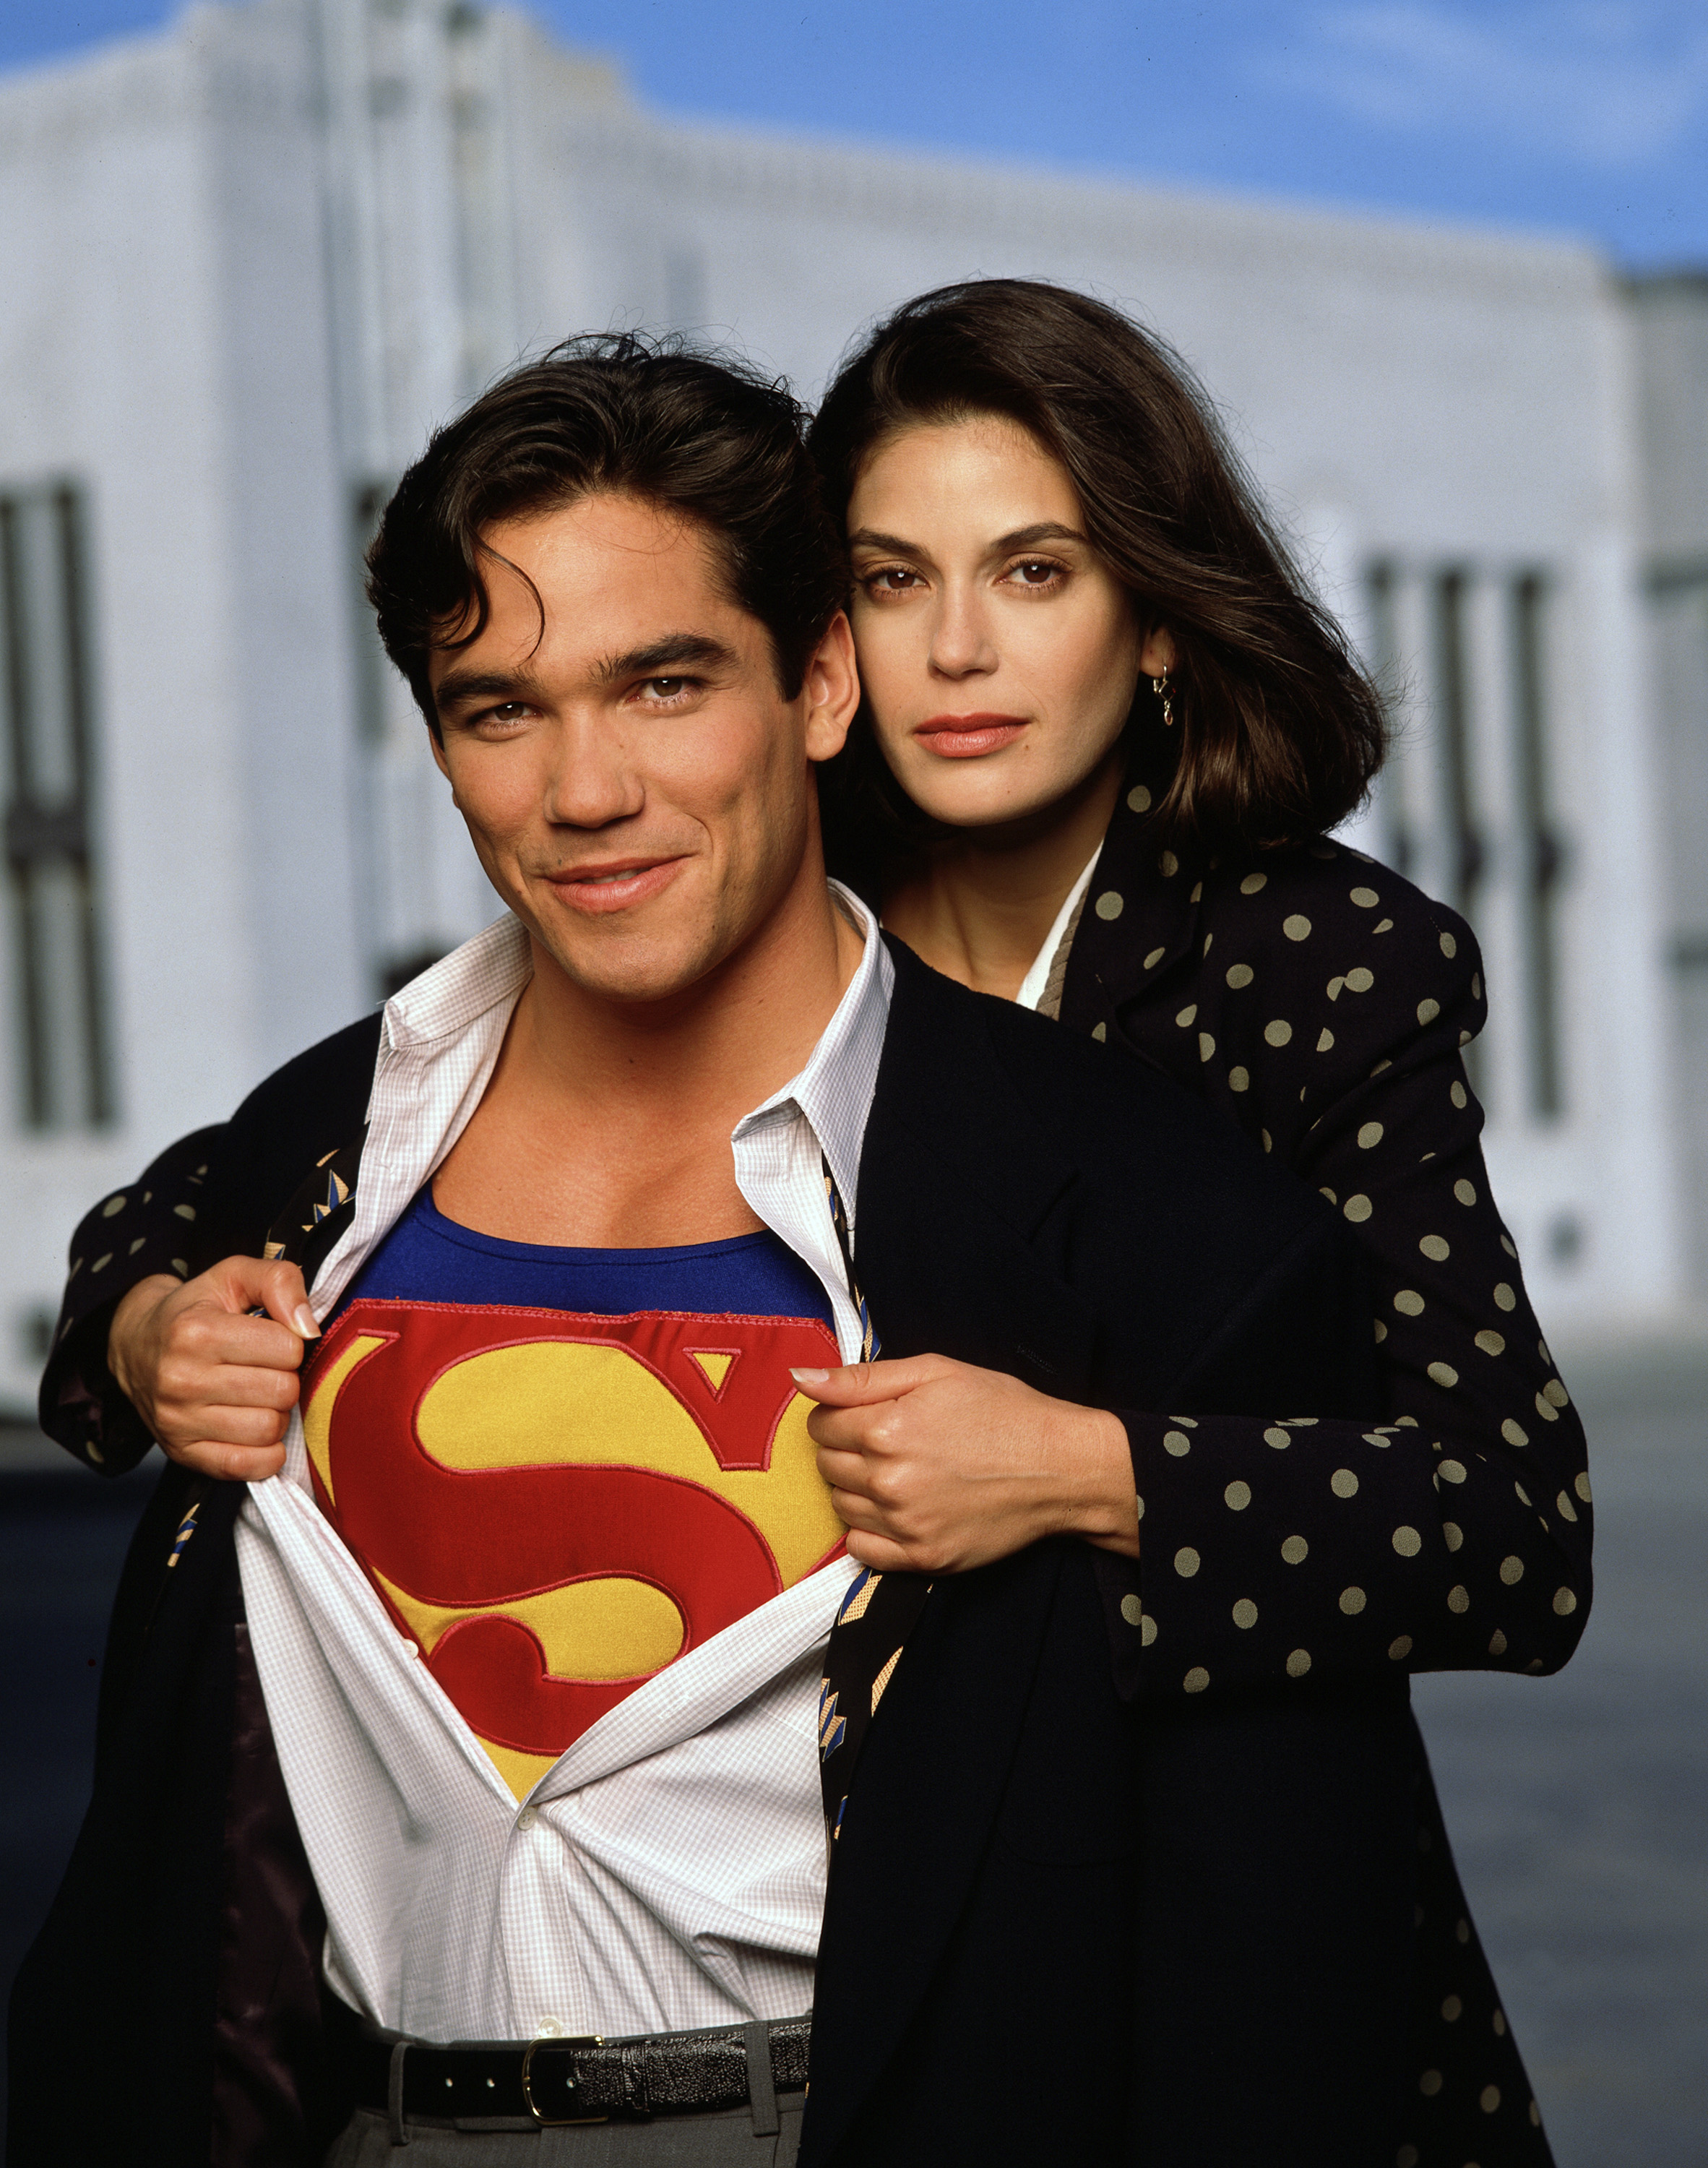 Dean Cain and Teri Hatcher in the scene from the pilot of the 1st season of "Lois & Clark: The New Adventures of Superman," in 1993 | Source: Getty Images